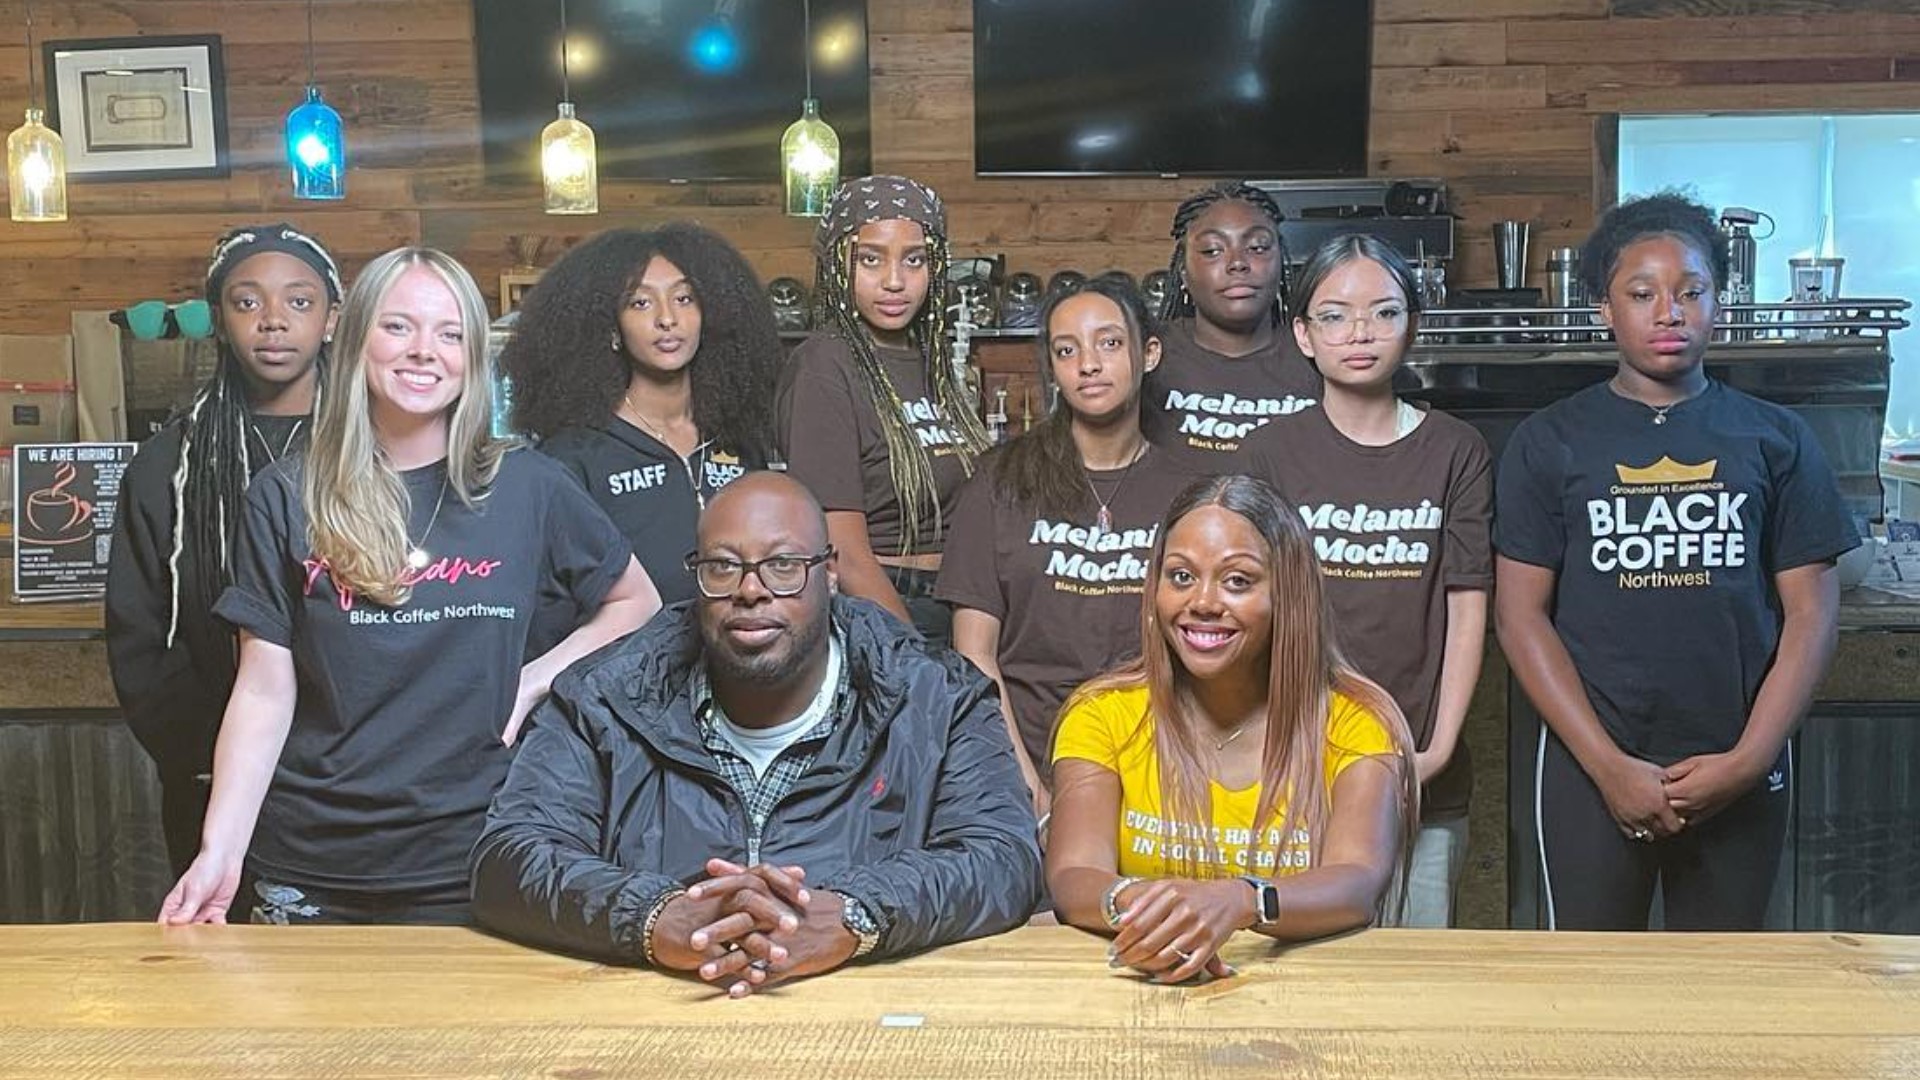 After only a year in business, Black Coffee Northwest is already growing its business and its community reach. #k5evening